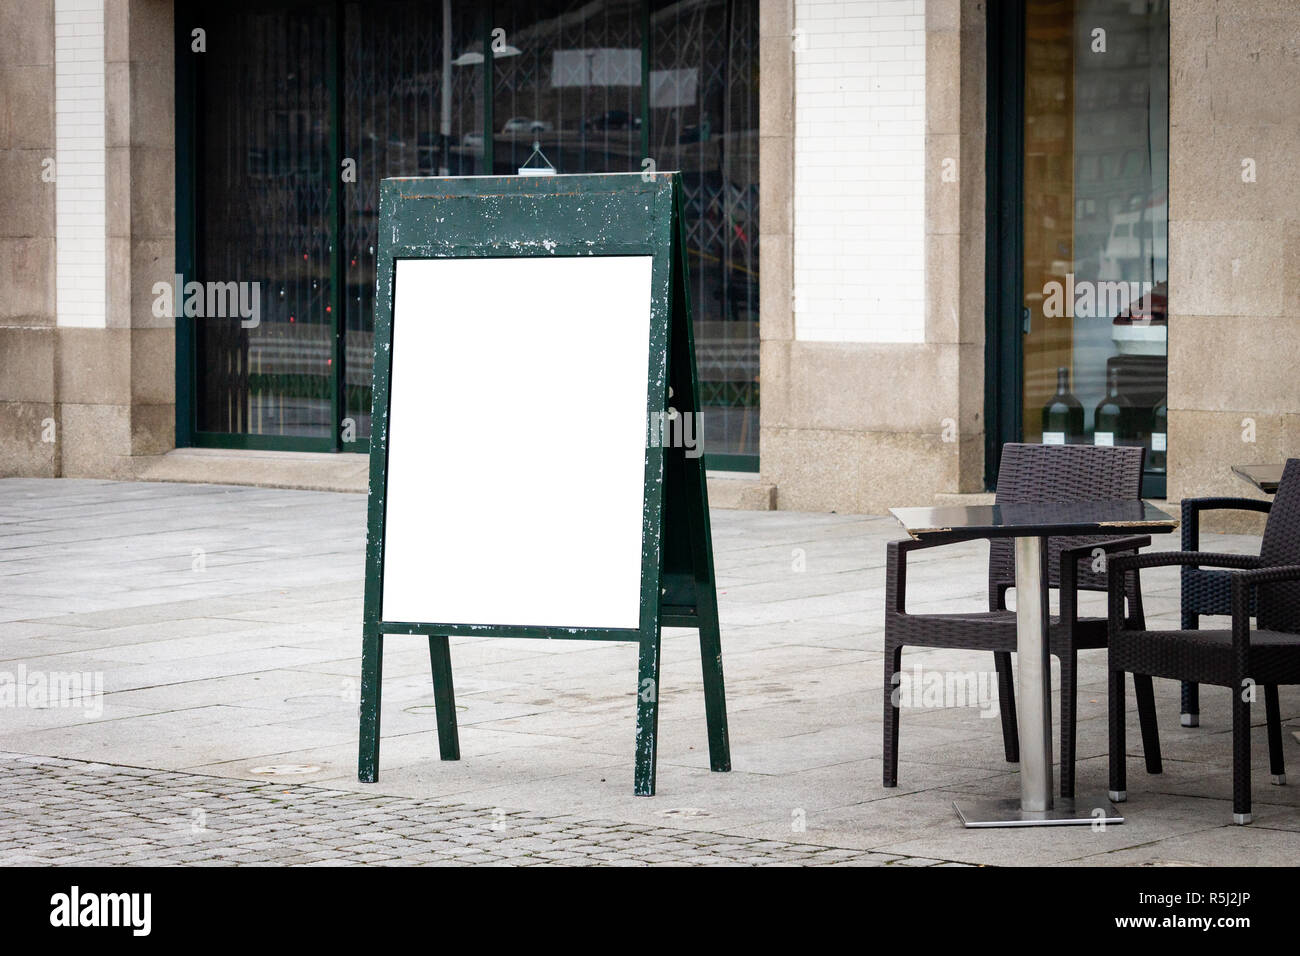 Restaurant cafe outdoor stand-up menu green sign mockup. Chairs and table on terrace. Stock Photo